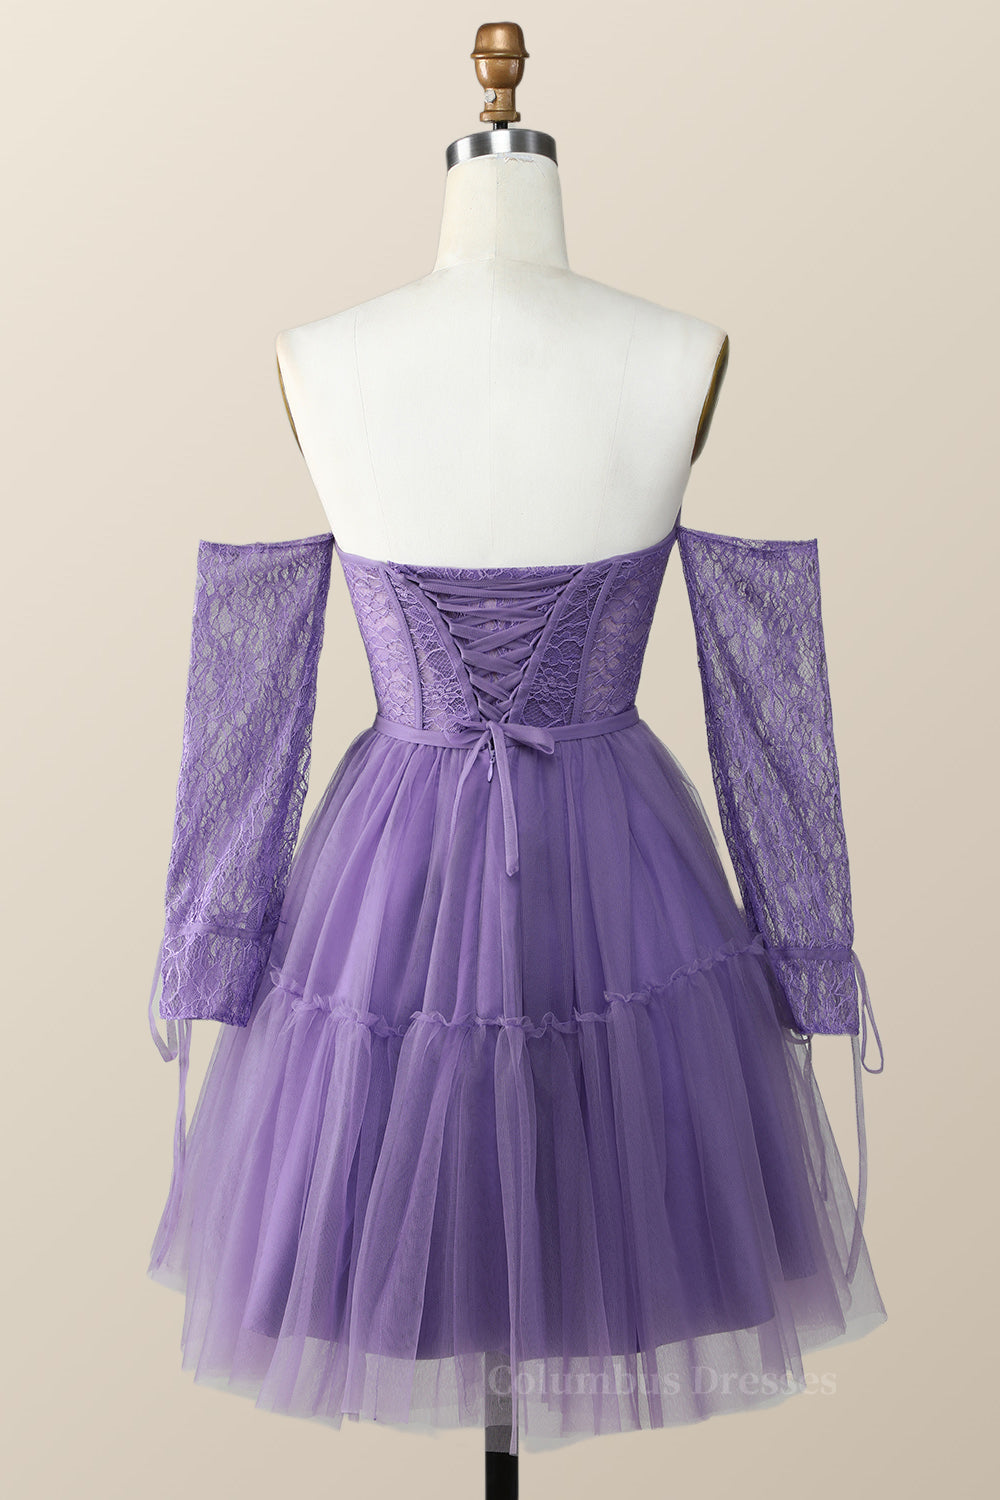 Bridesmaids Dresses Convertible, Long Sleeves Purple Lace and Tulle Short Homecoming Dress